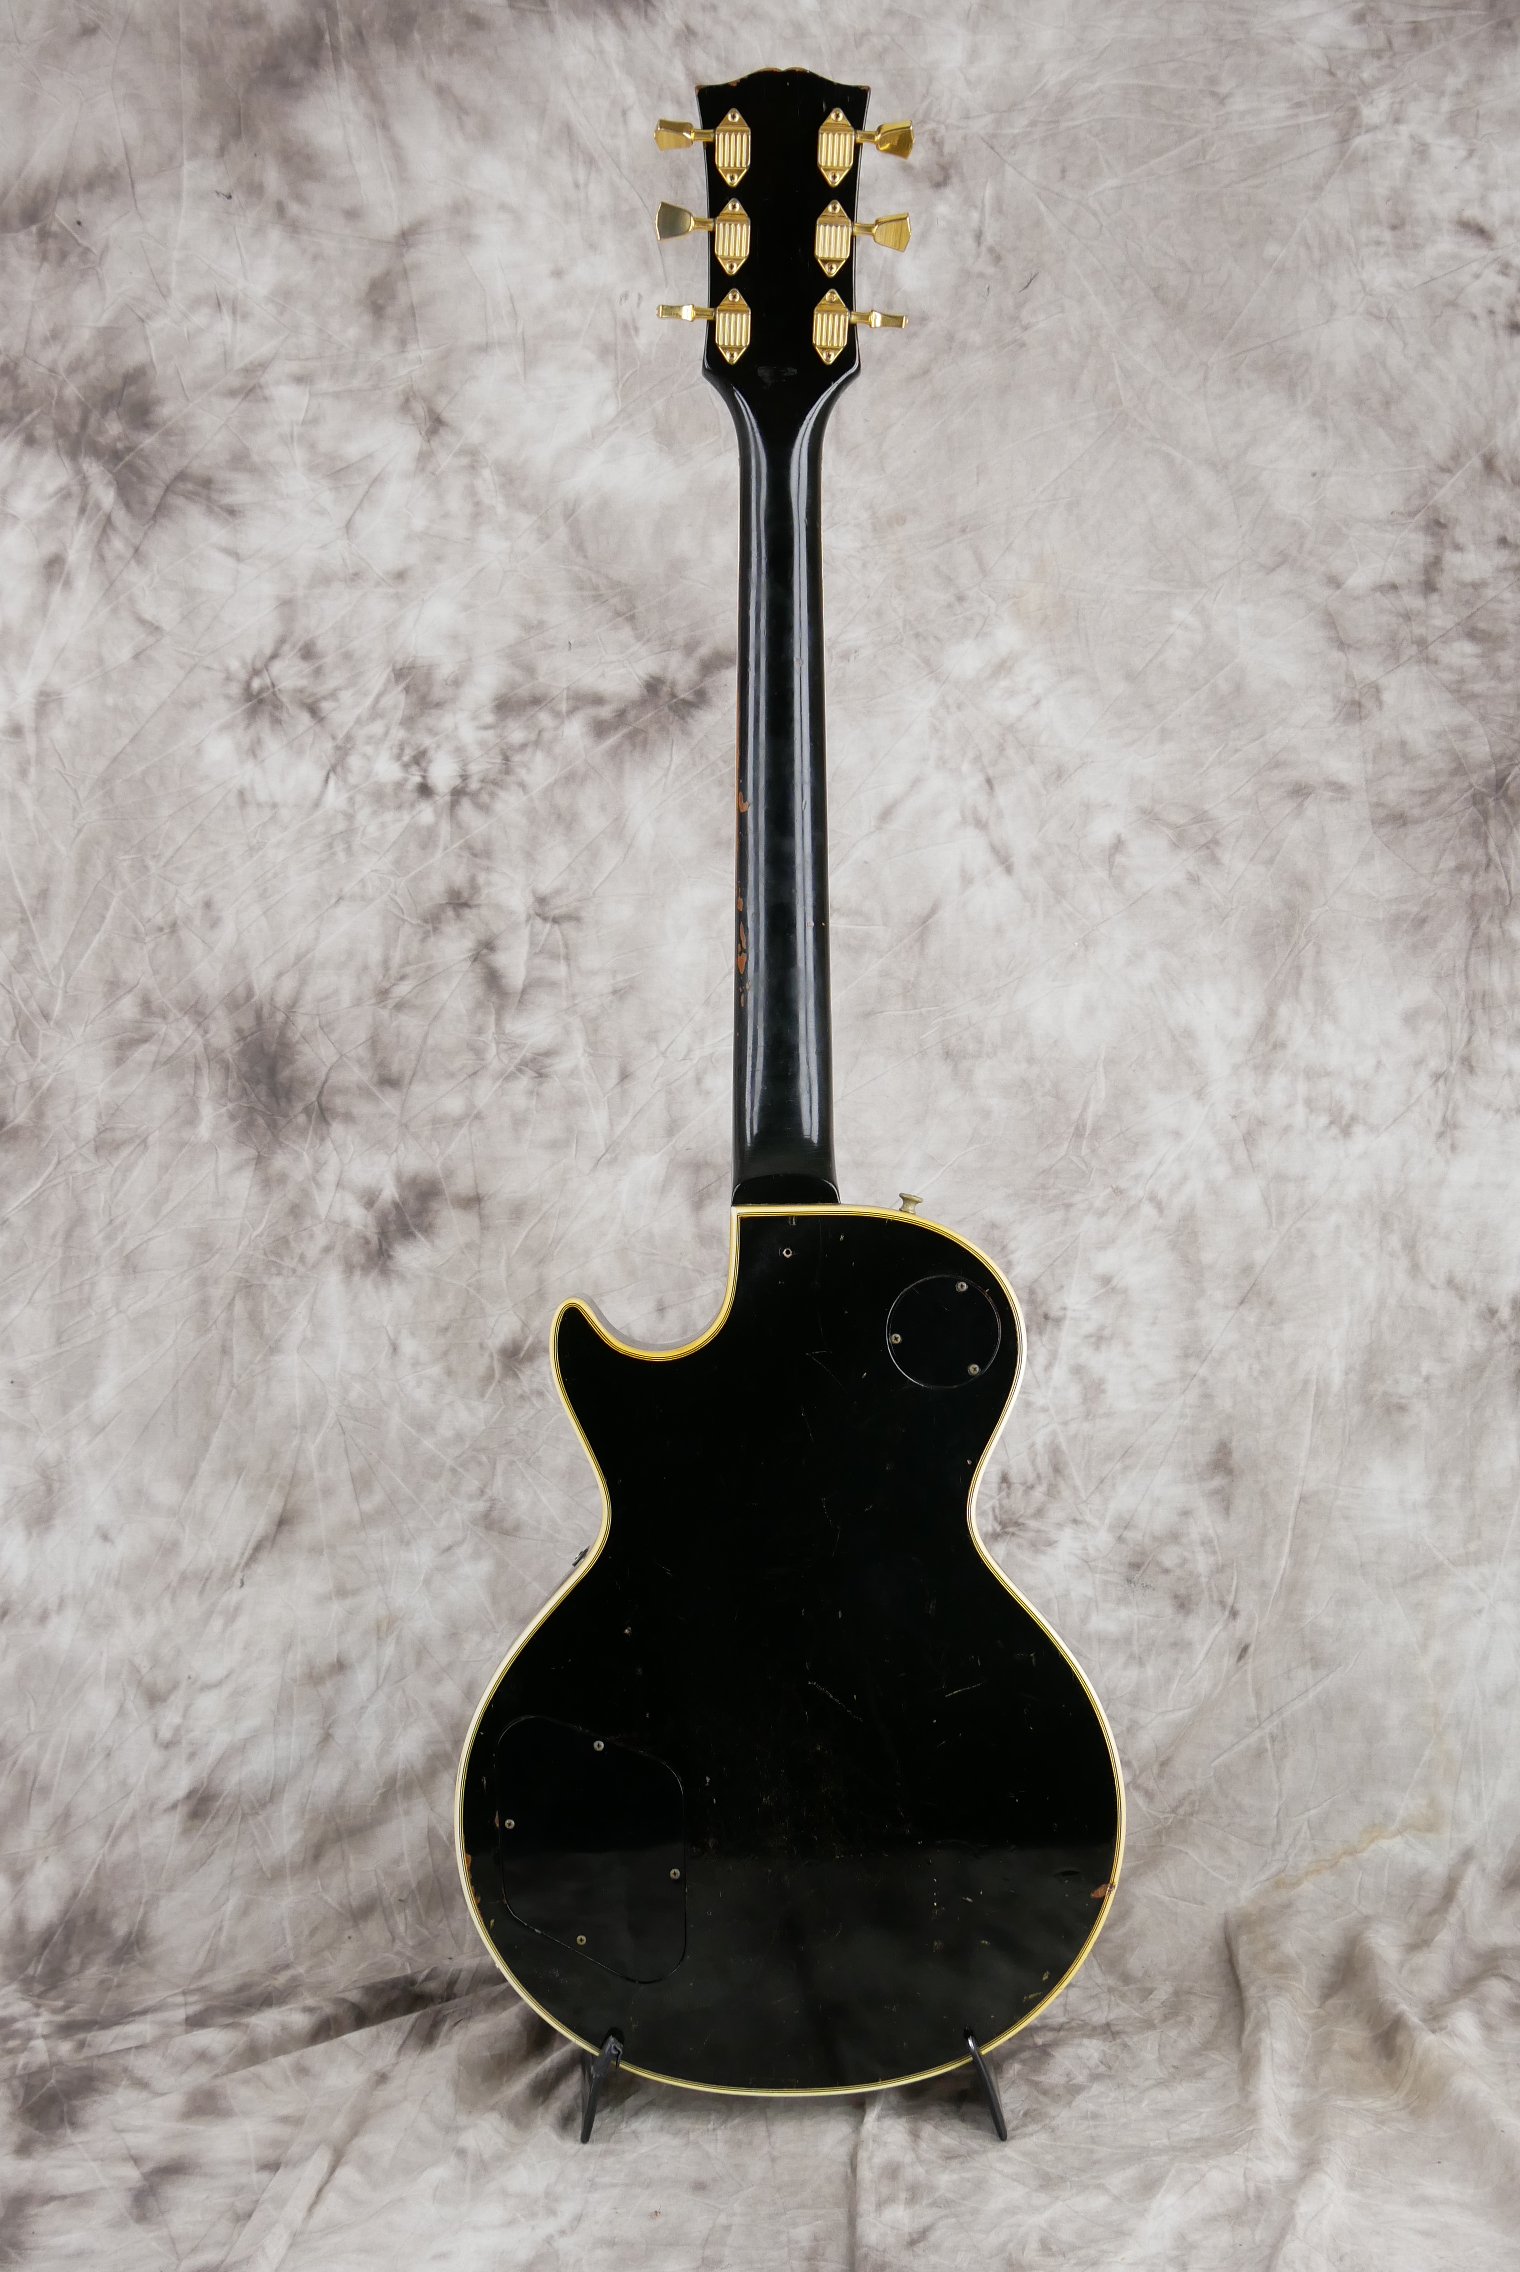 img/vintage/5115/Gibson-Les-Paul-Custom-1969-one-piece-body-and-neck-003.JPG